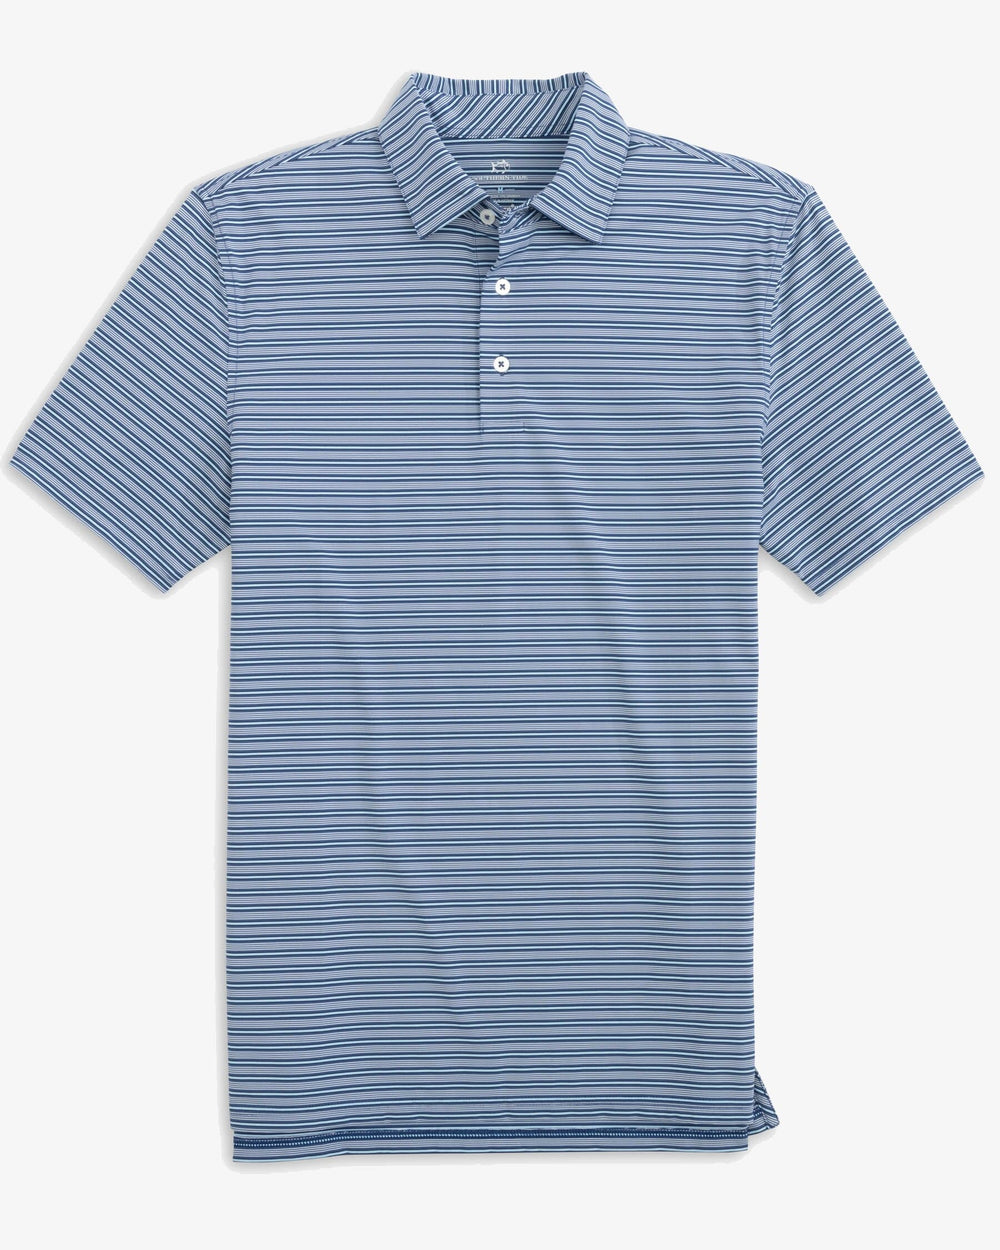 The front view of the Southern Tide Brrreeze Crawford Stripe Performance Polo Shirt by Southern Tide - Aged Denim